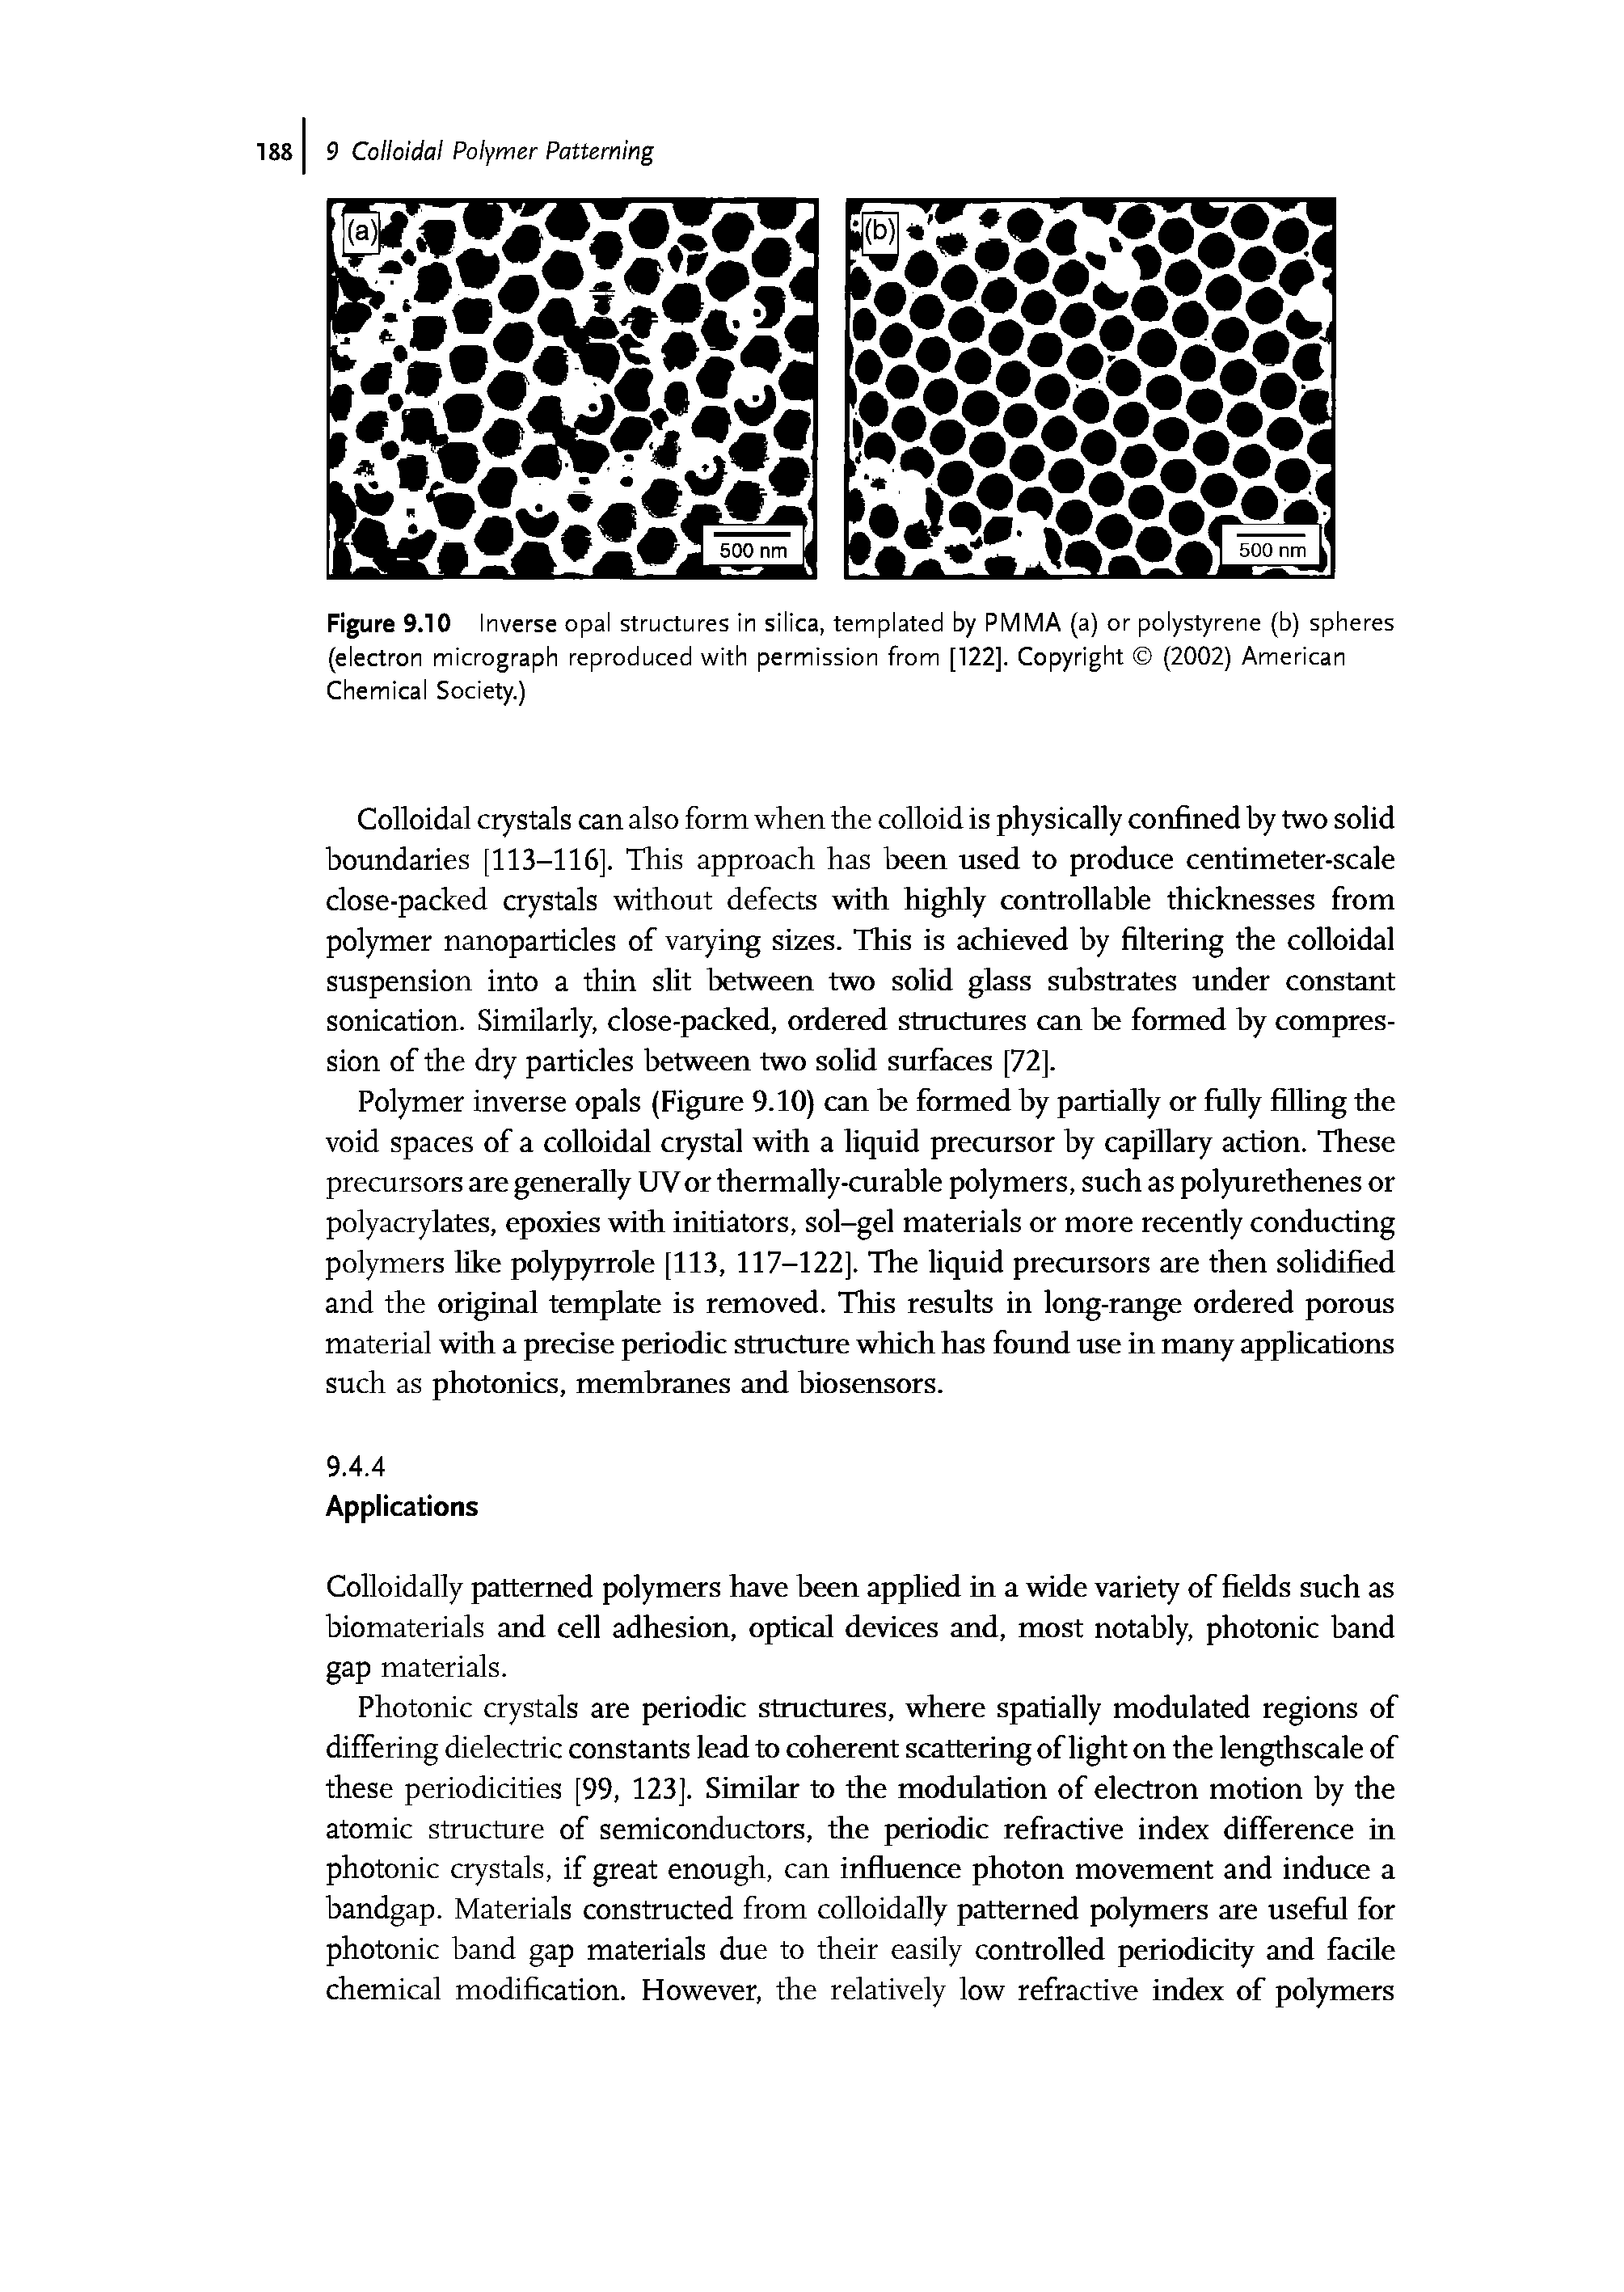 Figure 9.10 Inverse opal structures in silica, templated by PMMA (a) or polystyrene (b) spheres (electron micrograph reproduced with permission from [122]. Copyright (2002) American Chemical Society.)...